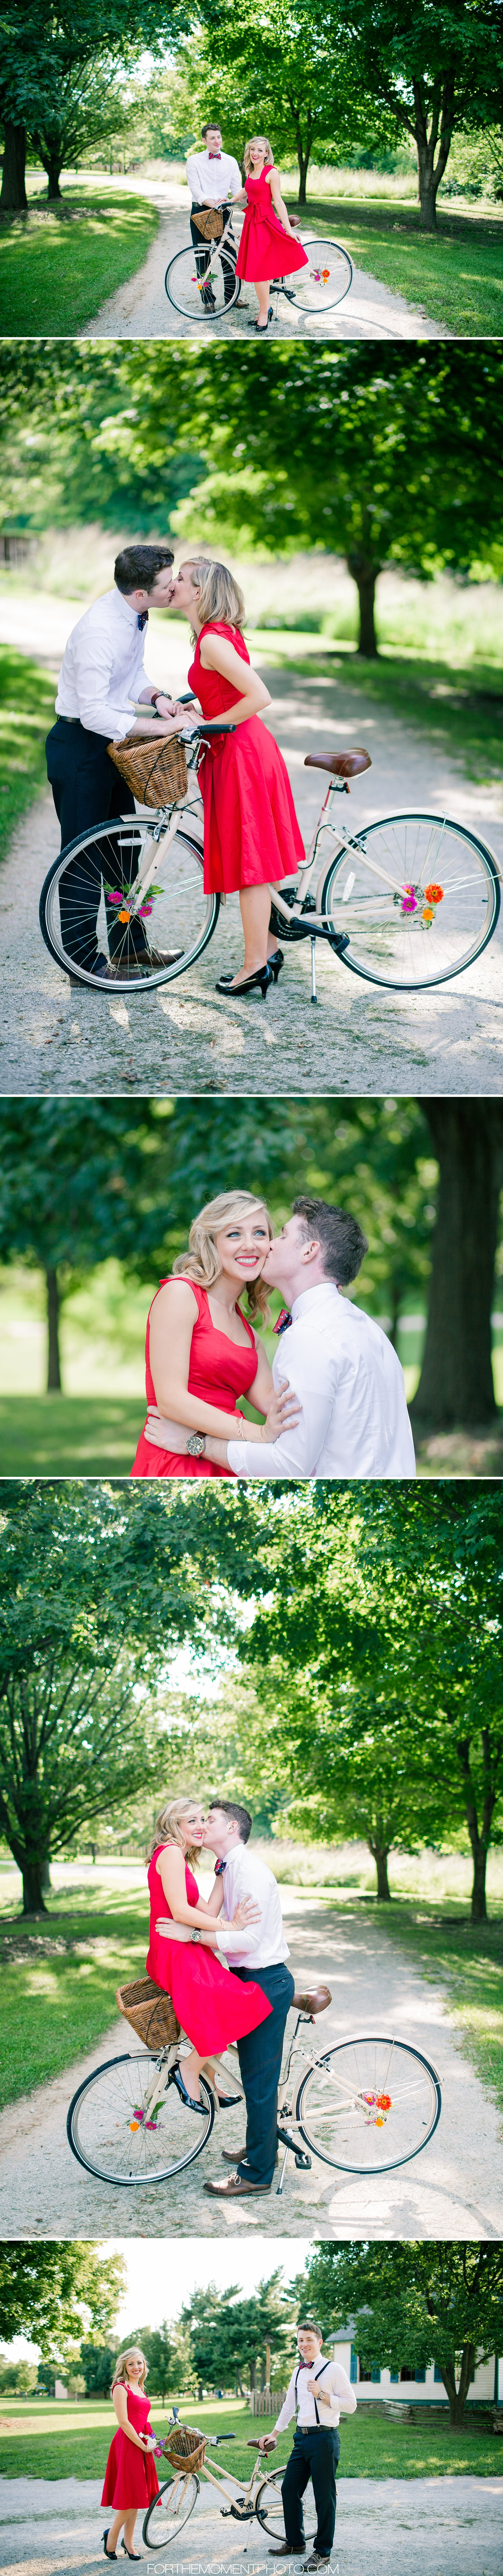 Whimsical Bicycle Faust Park Engagement Photos